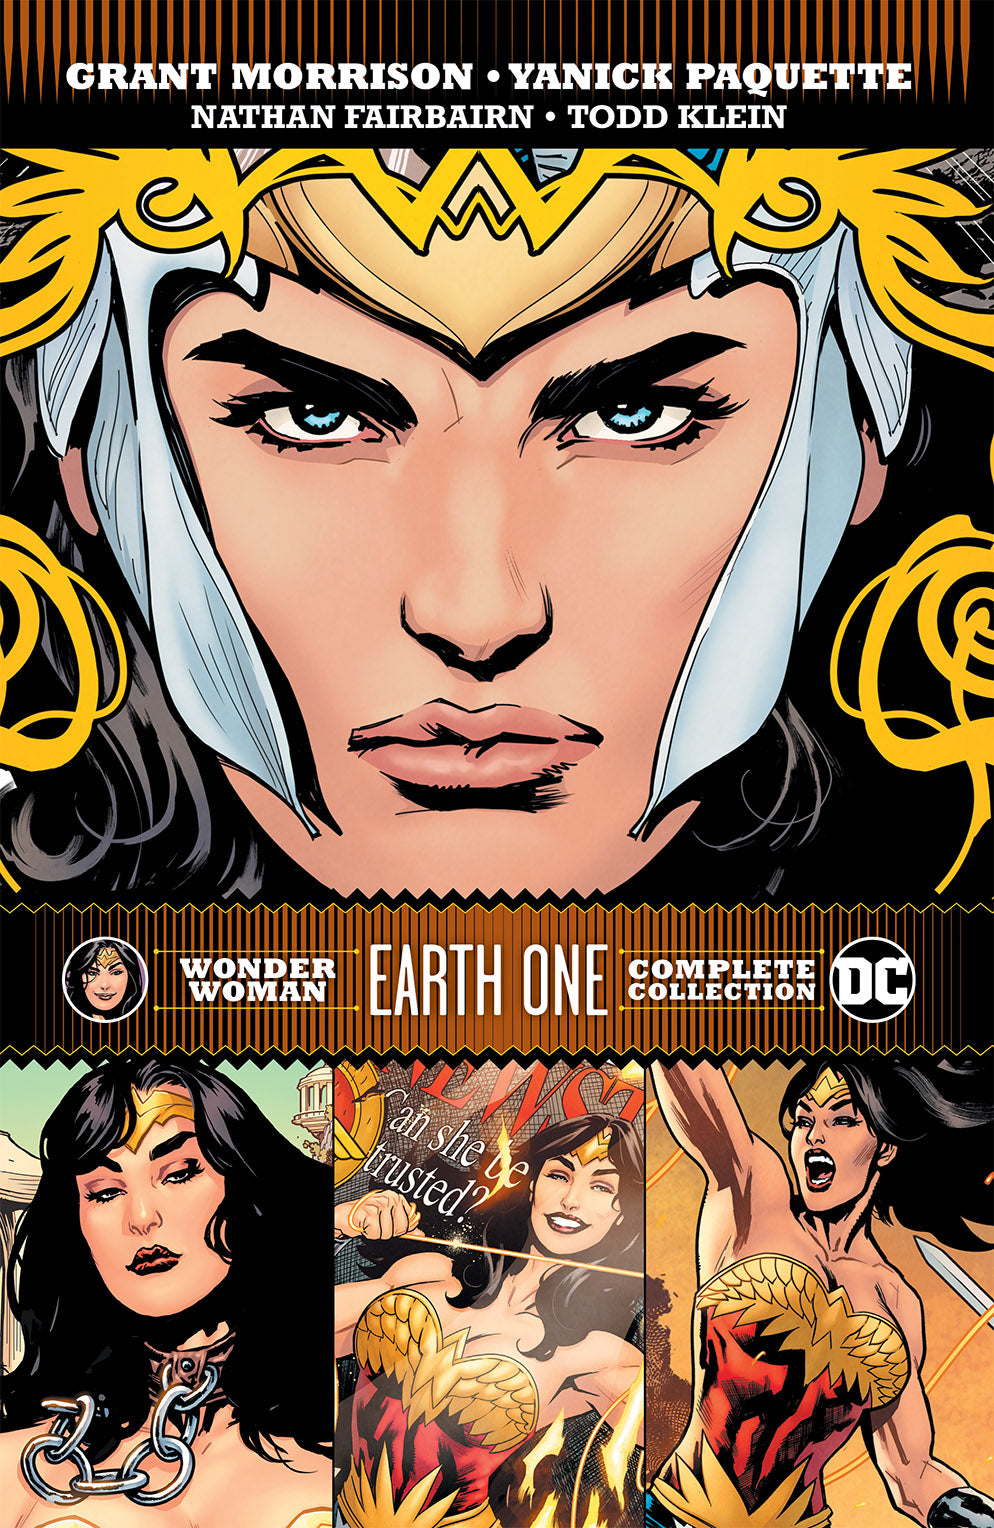 WONDER WOMAN EARTH ONE COMPLETE COLLECTION TRADE PAPERBACK